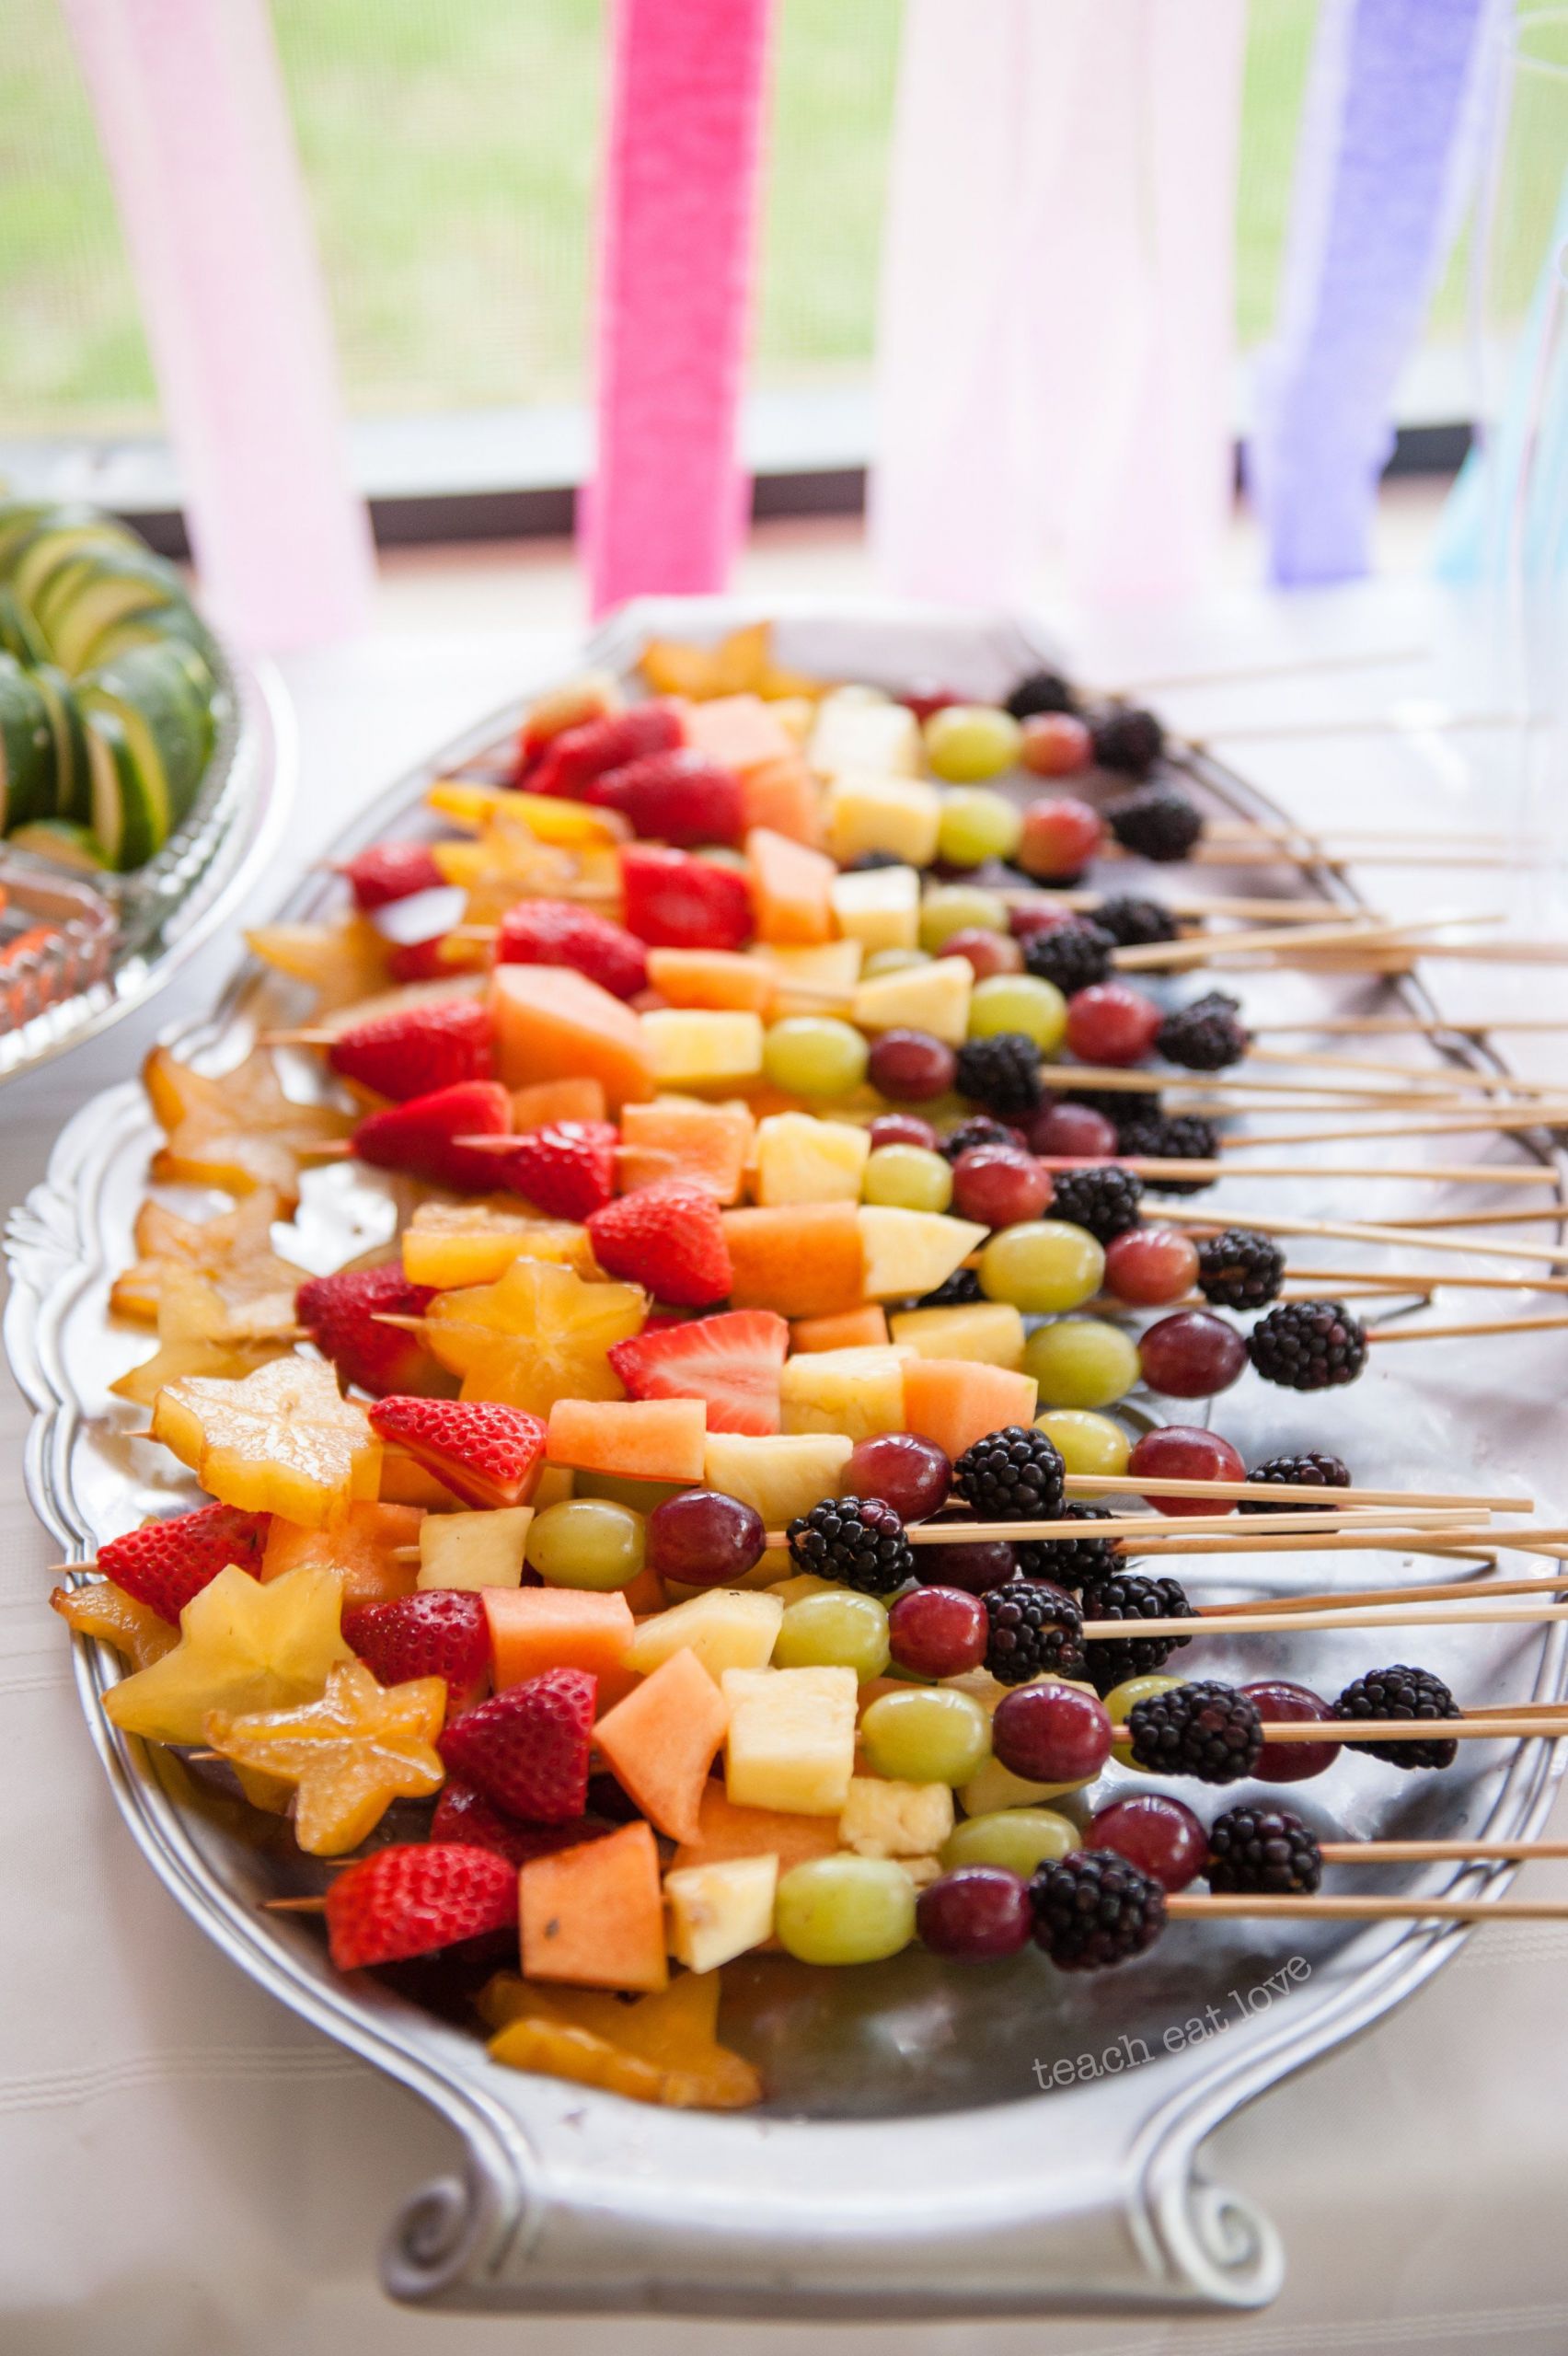 Baby Birthday Party Food Ideas
 The Baby’s First Birthday Recipe Round up and Fruit